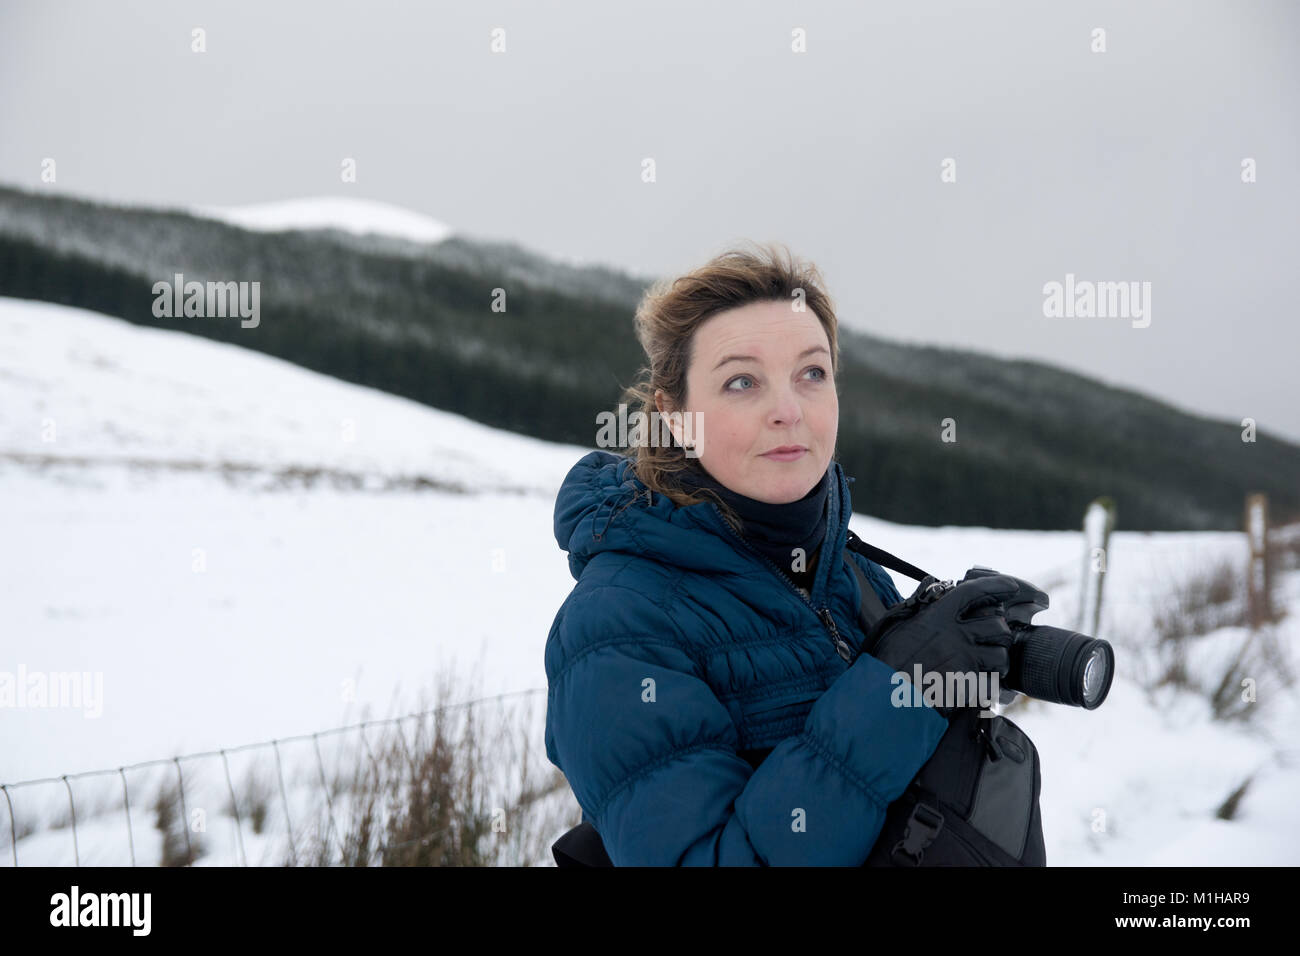 Female photographer in a blue coat taking landscape pictures in the snow in winter Stock Photo